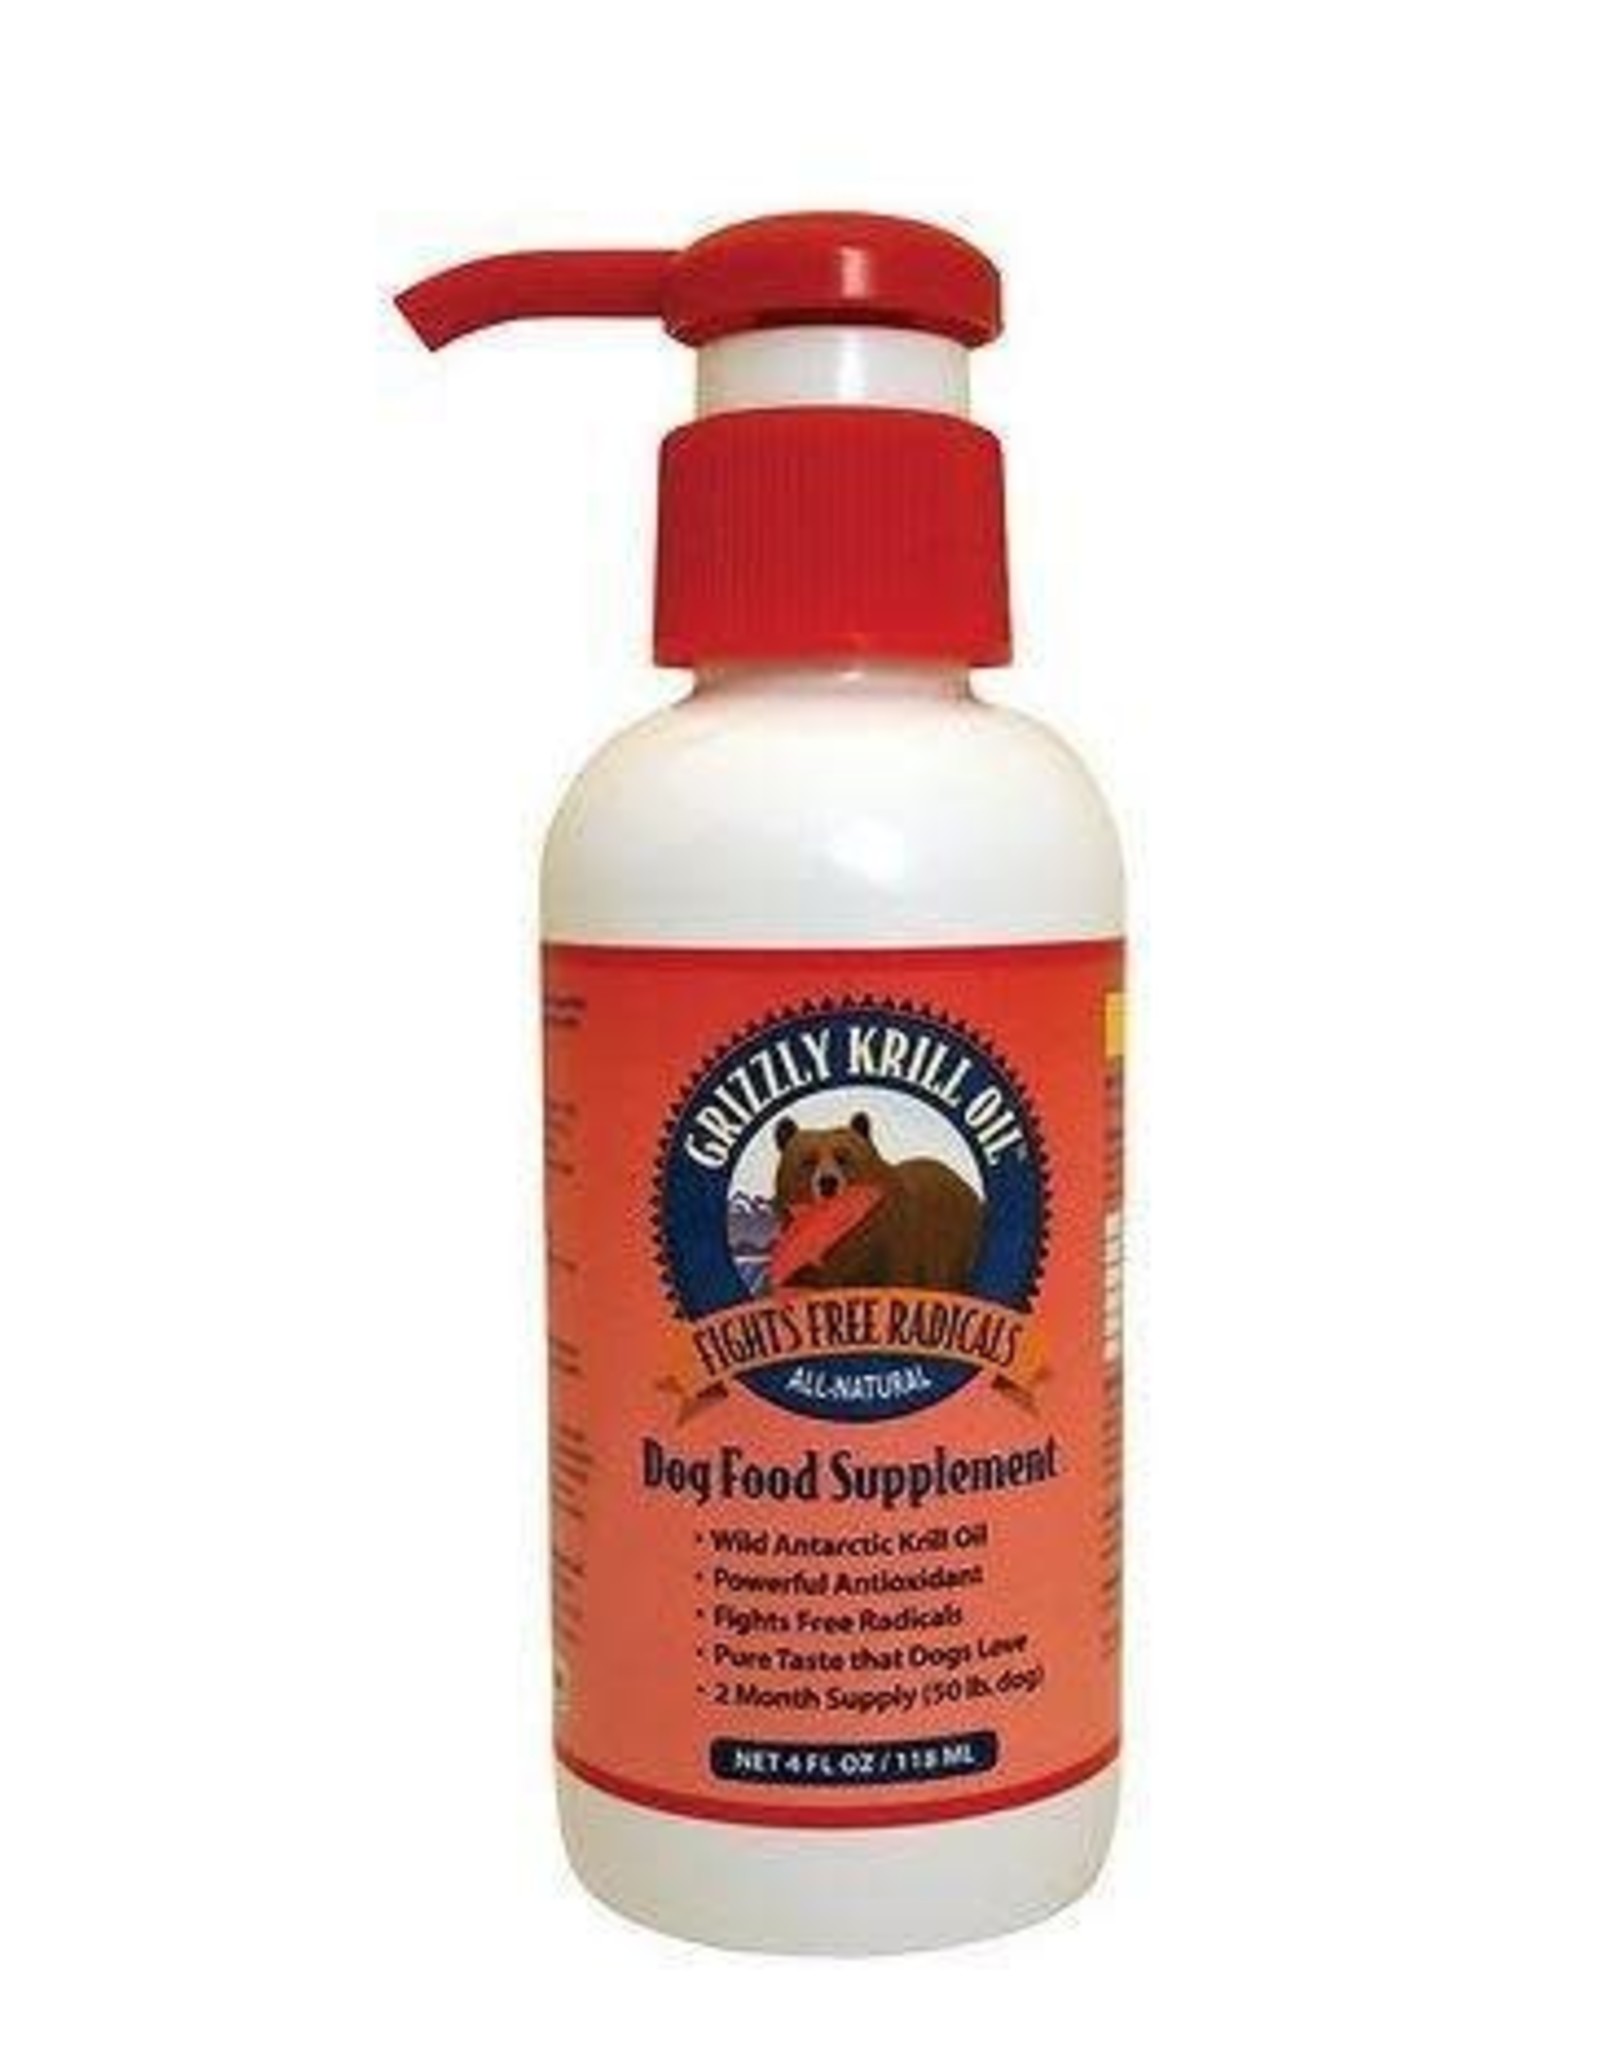 Grizzly Pet Products Grizzly Krill Oil Antioxidant Dog Supplement 4 oz